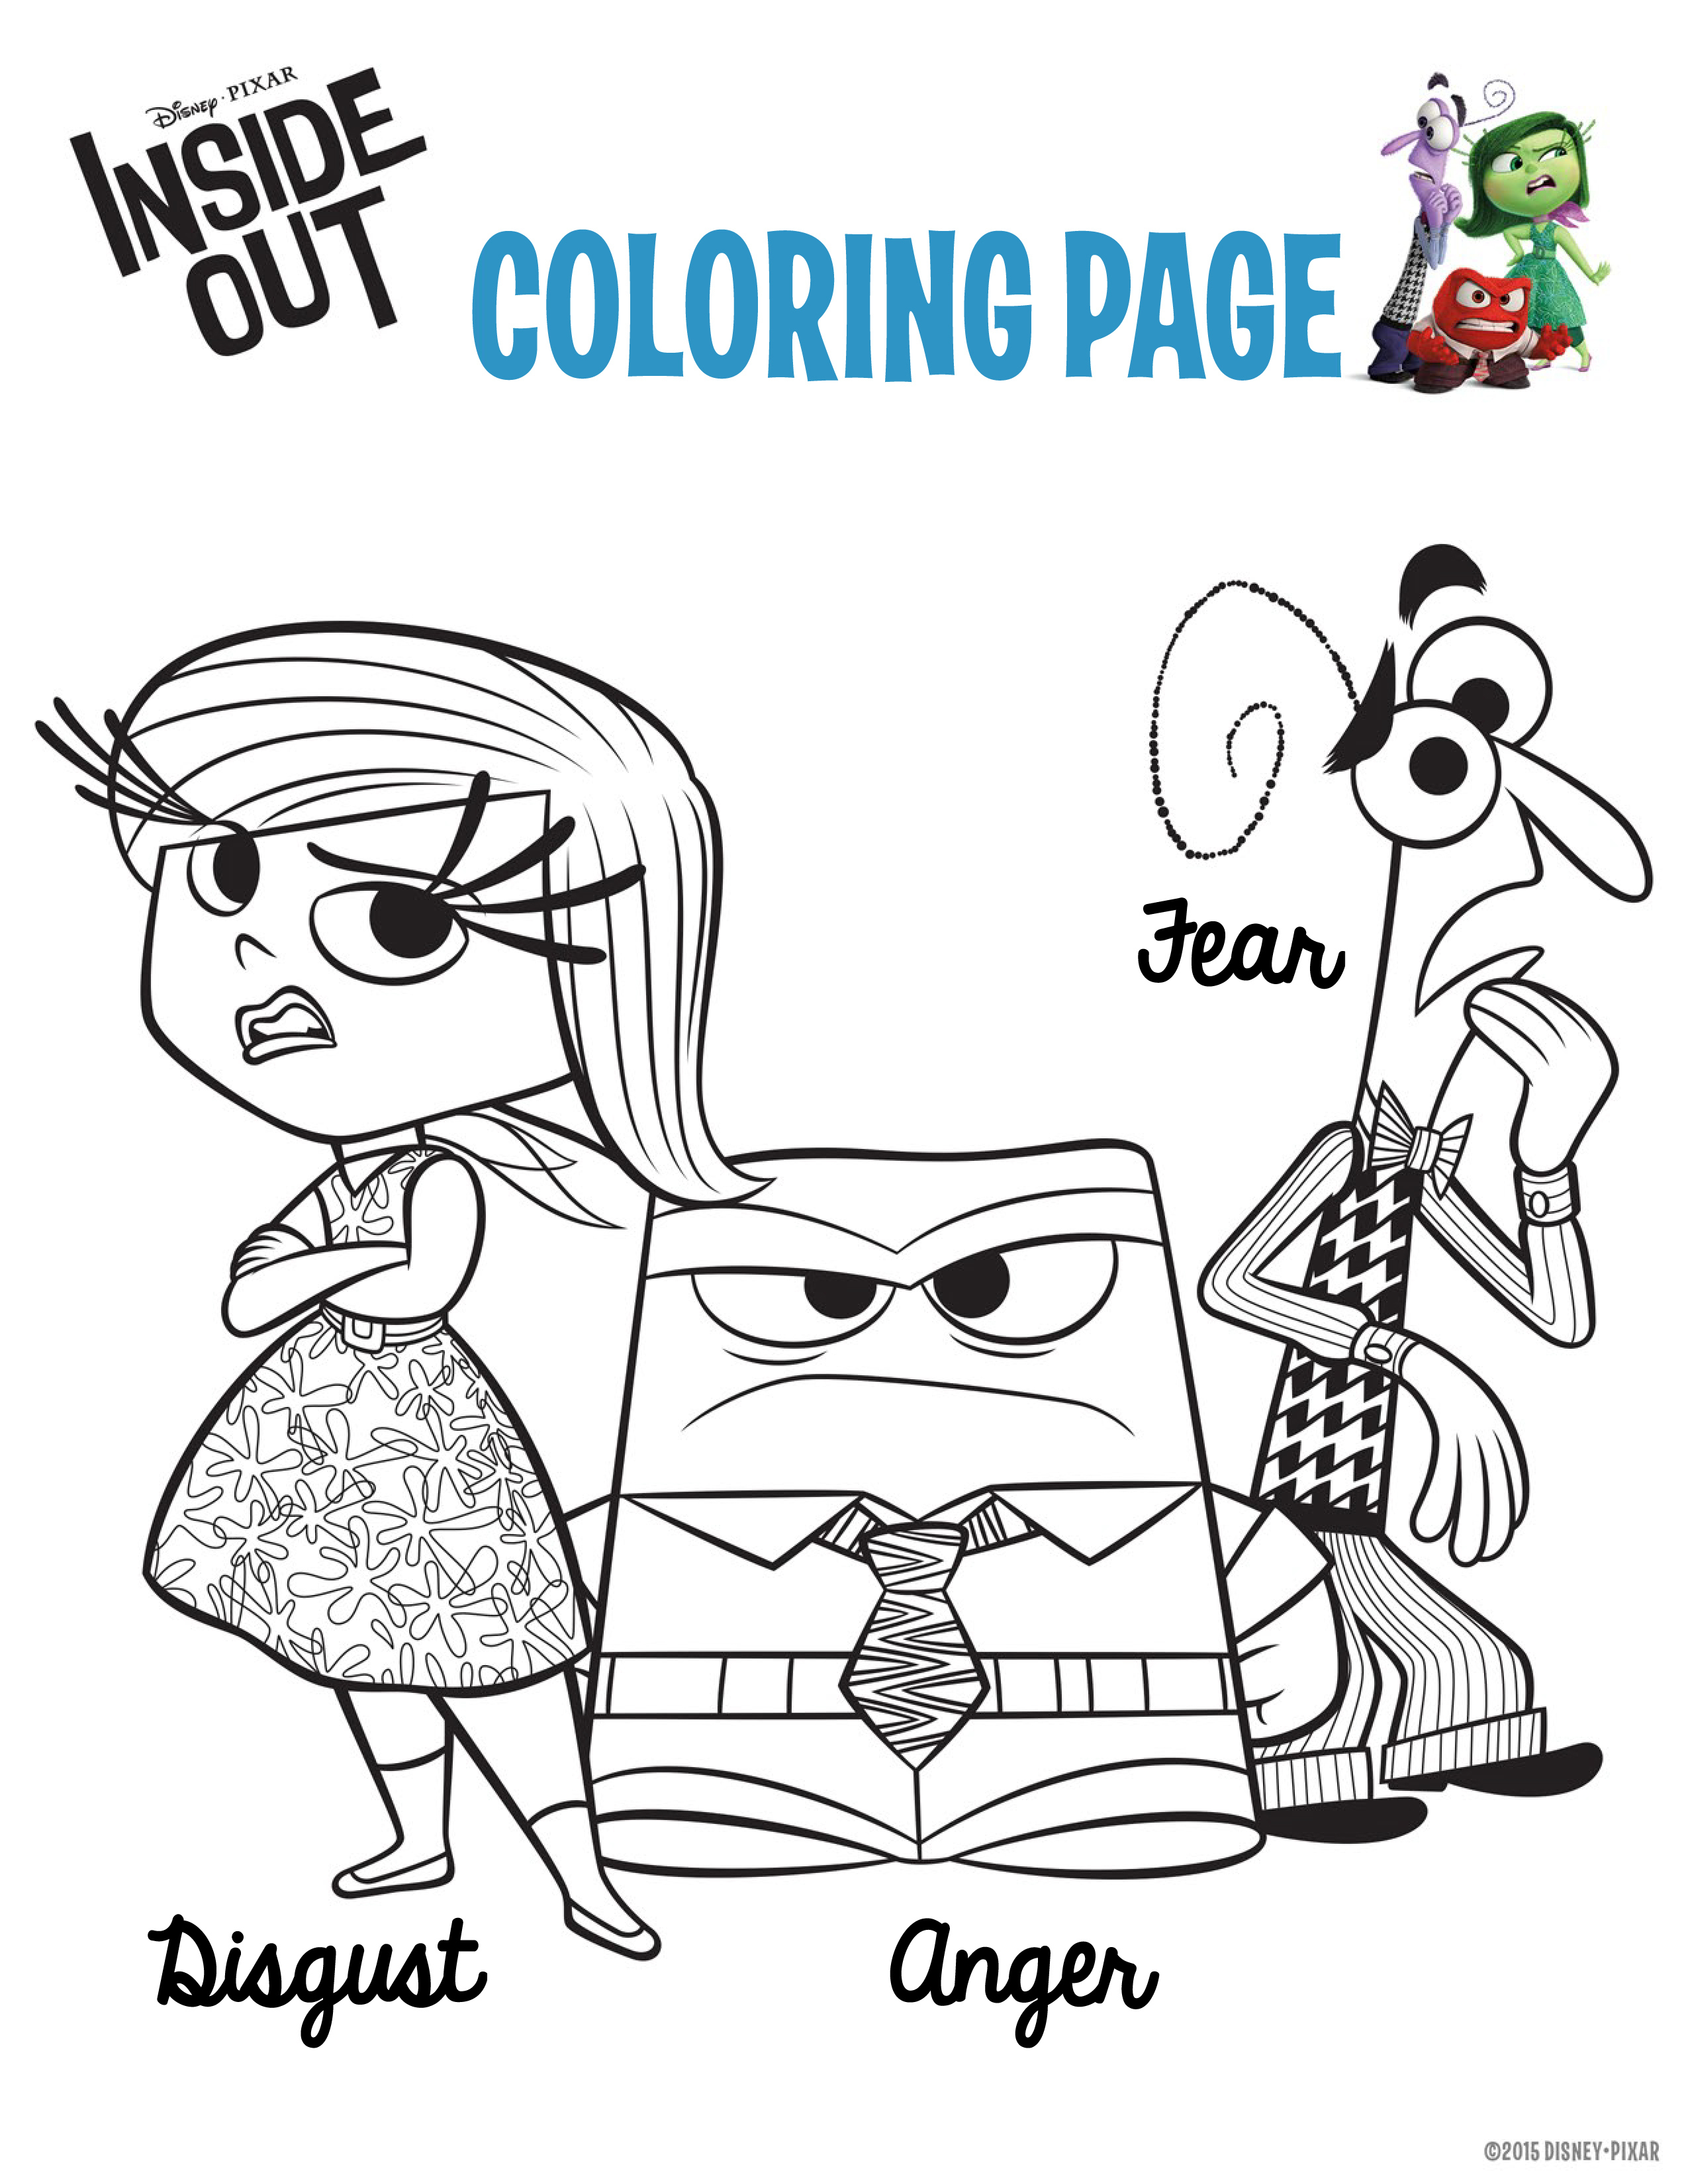 Free Inside Out coloring page to download : Disgut, Anger and Fear